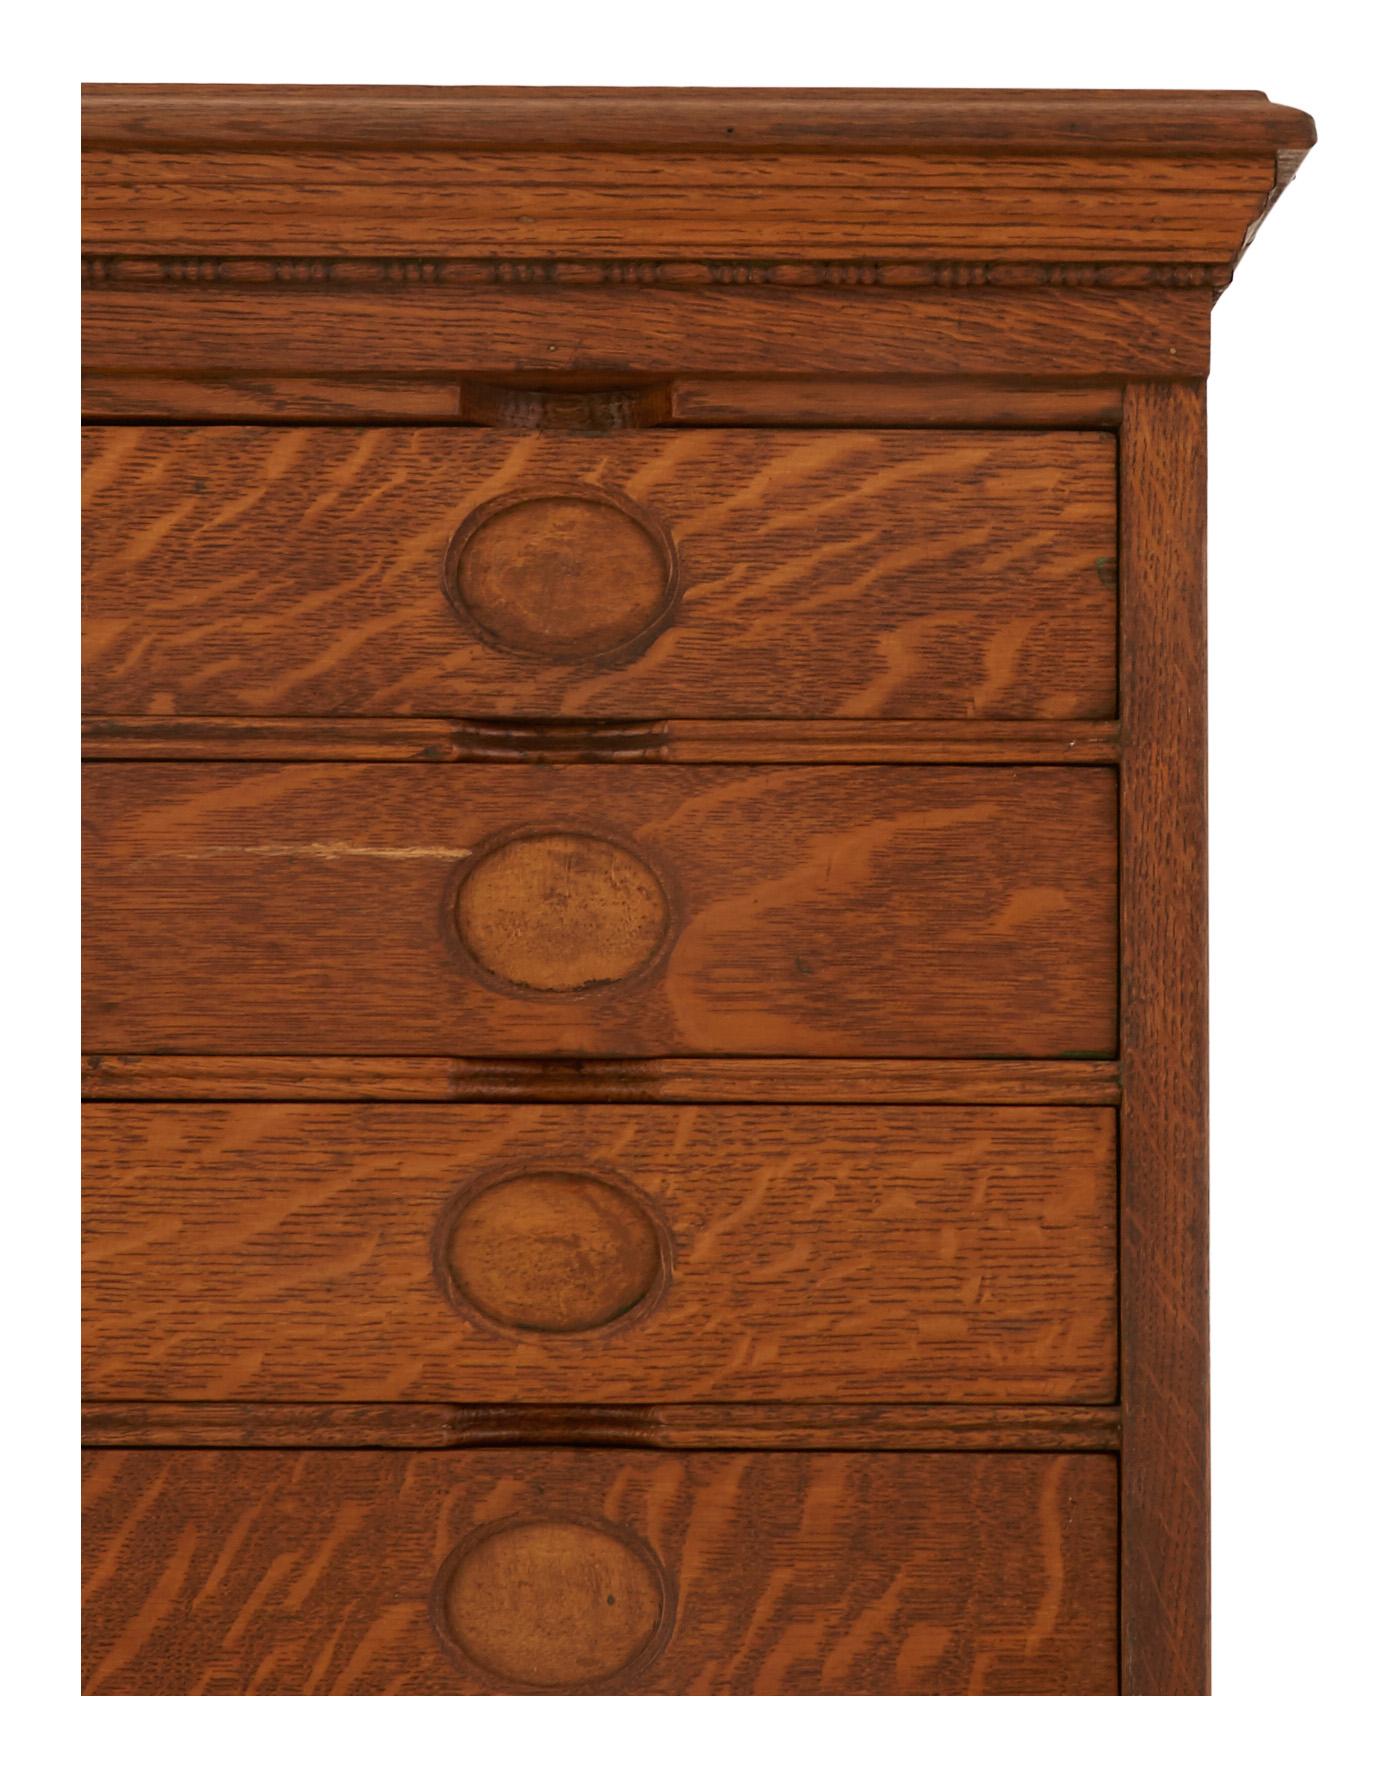 Wood Amberg Imperial Letter 2 Section Filing Cabinet For Sale